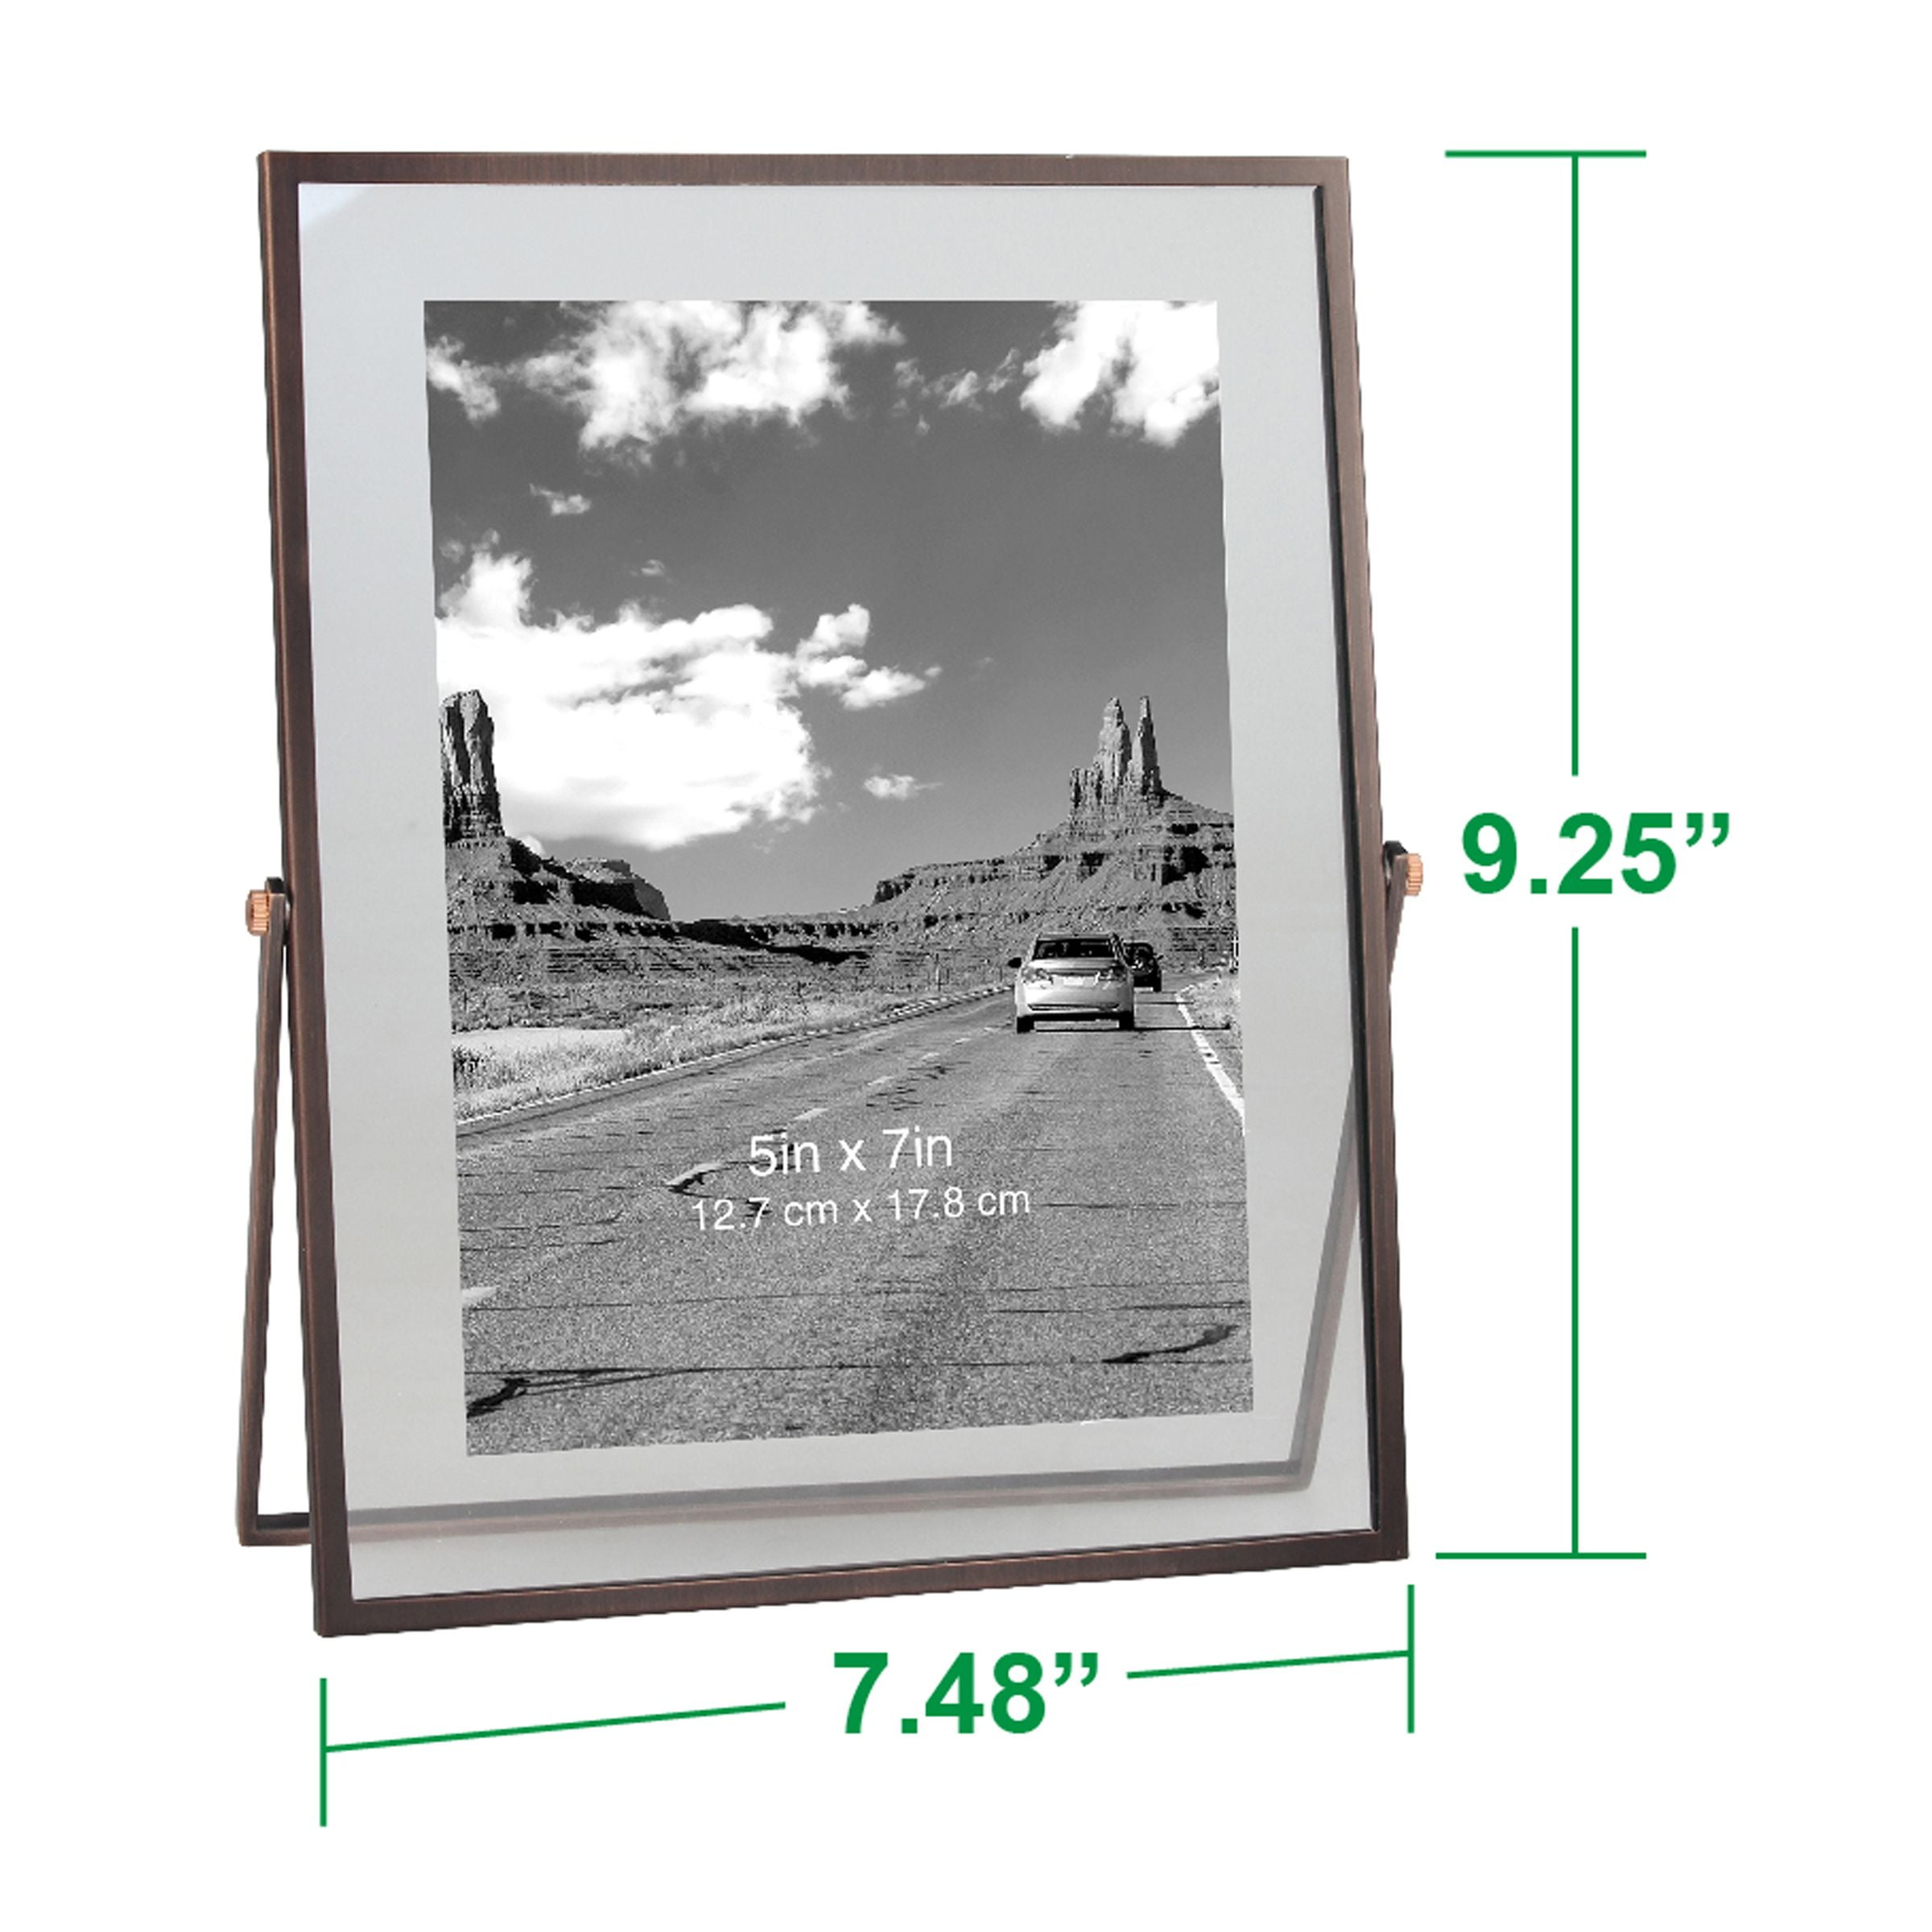 FABULAXE 4 in. x 4 in. Black Modern Metal Floating Tabletop Square Photo  Picture Frame with Glass Cover and Easel Stand QI004066.BK.S - The Home  Depot